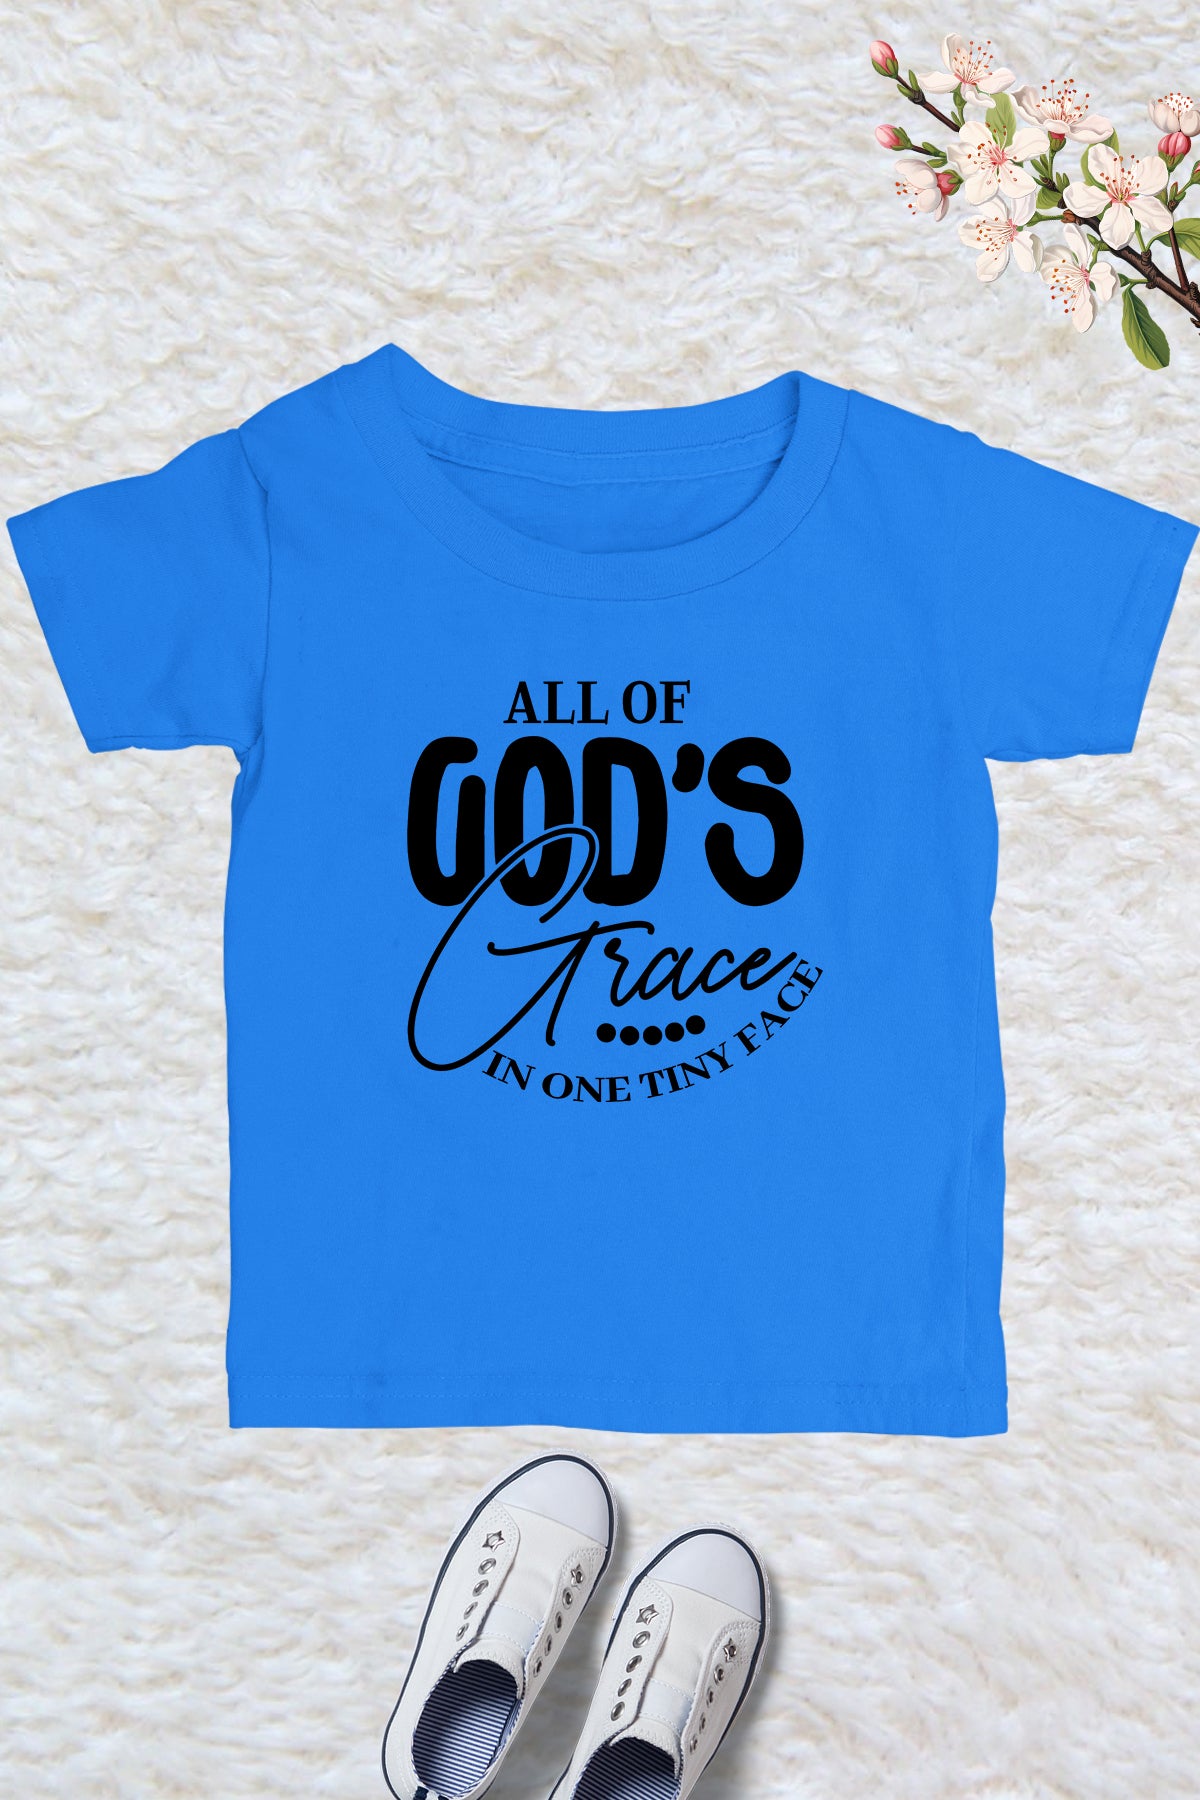 All of God's Grace In One Tiny face Kids Shirt